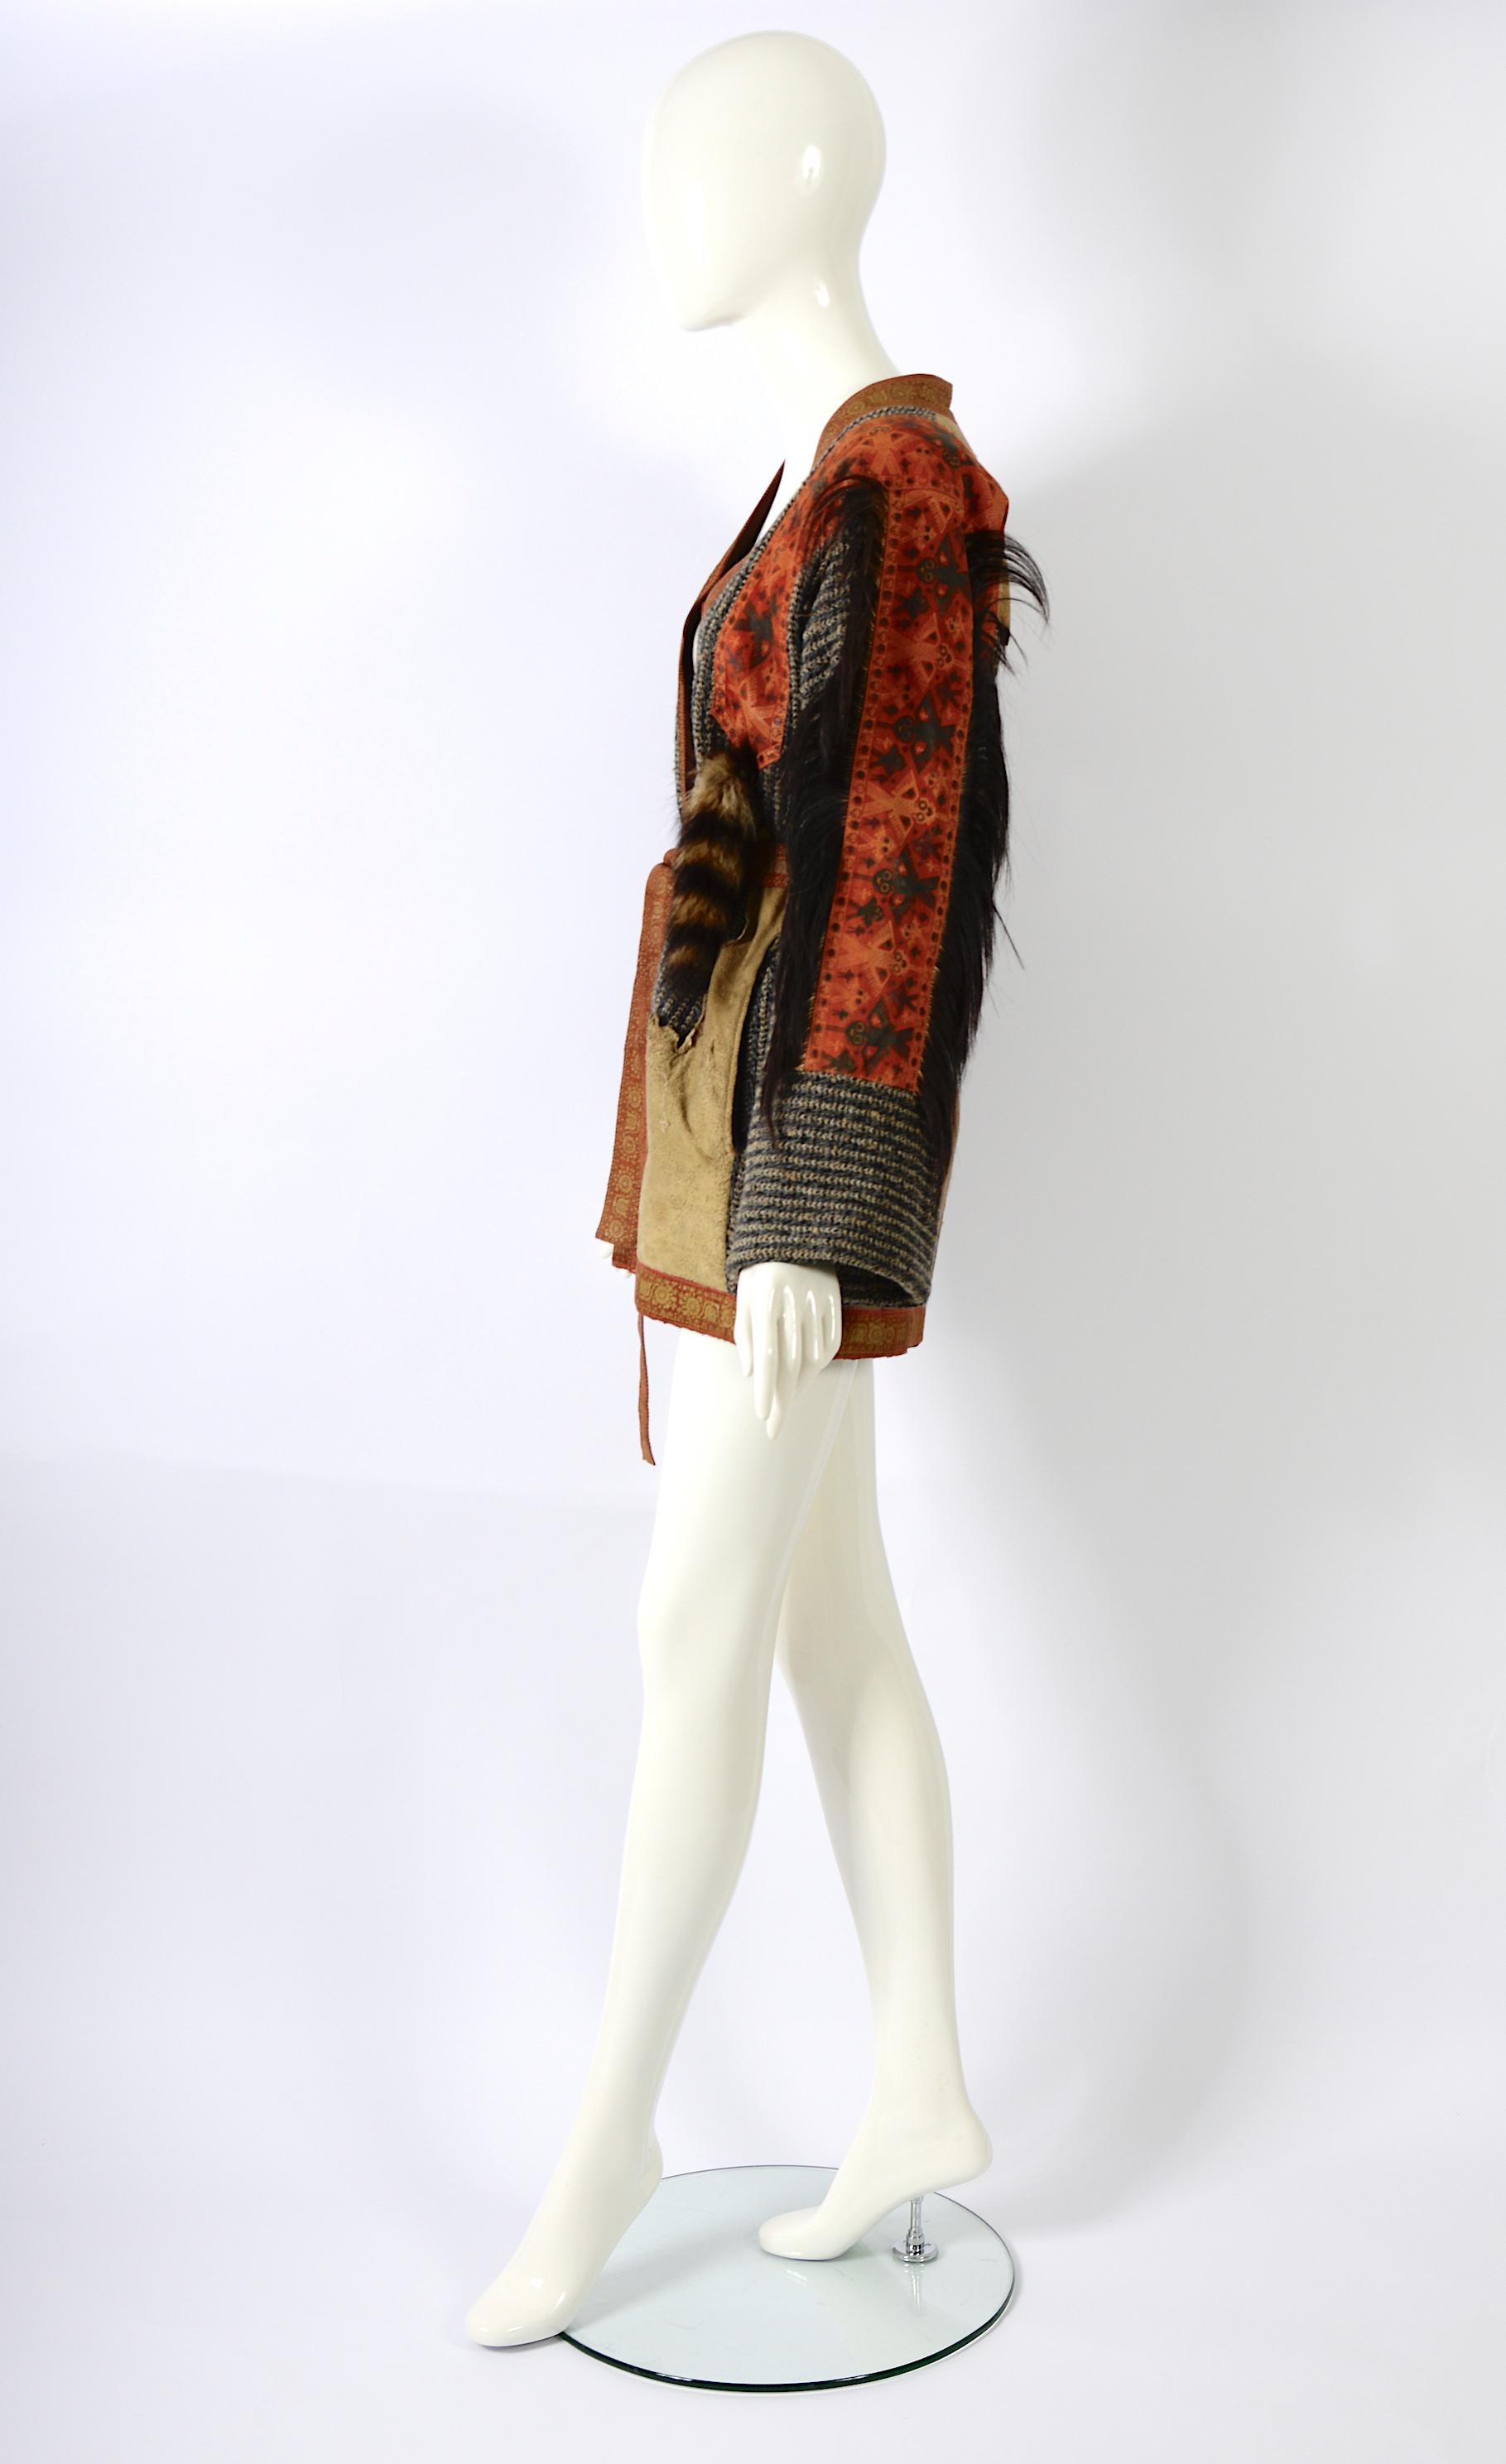 Roberto Cavalli Museum-Worthy 1971 Patchwork Debut Collection Vintage Jacket  For Sale 1